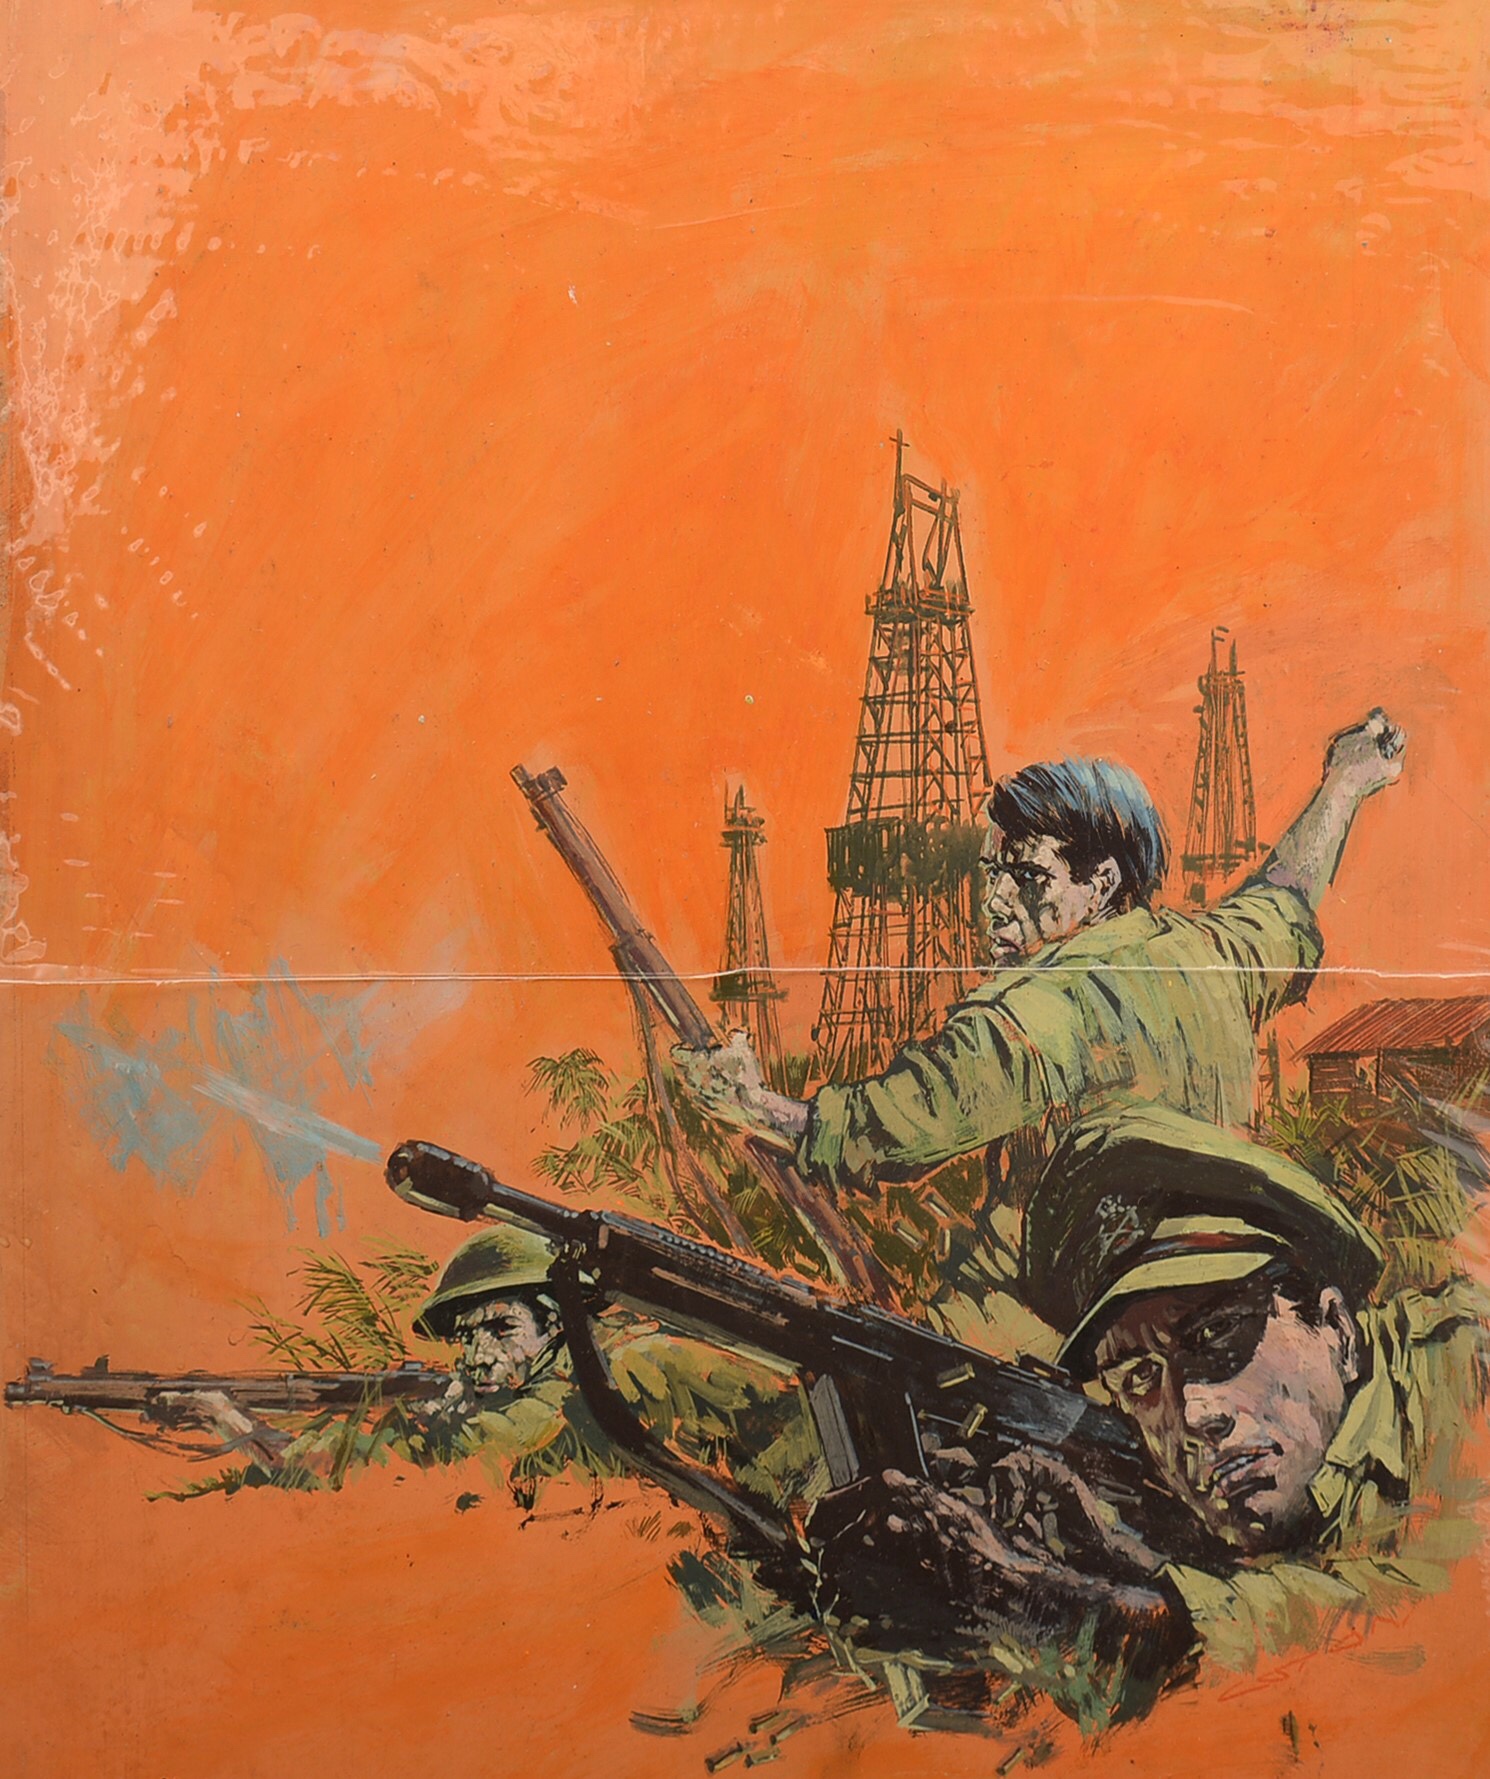 Original art for the cover of Battle Picture Library, No. 617 'Maddock Must Die', by Graham Coton